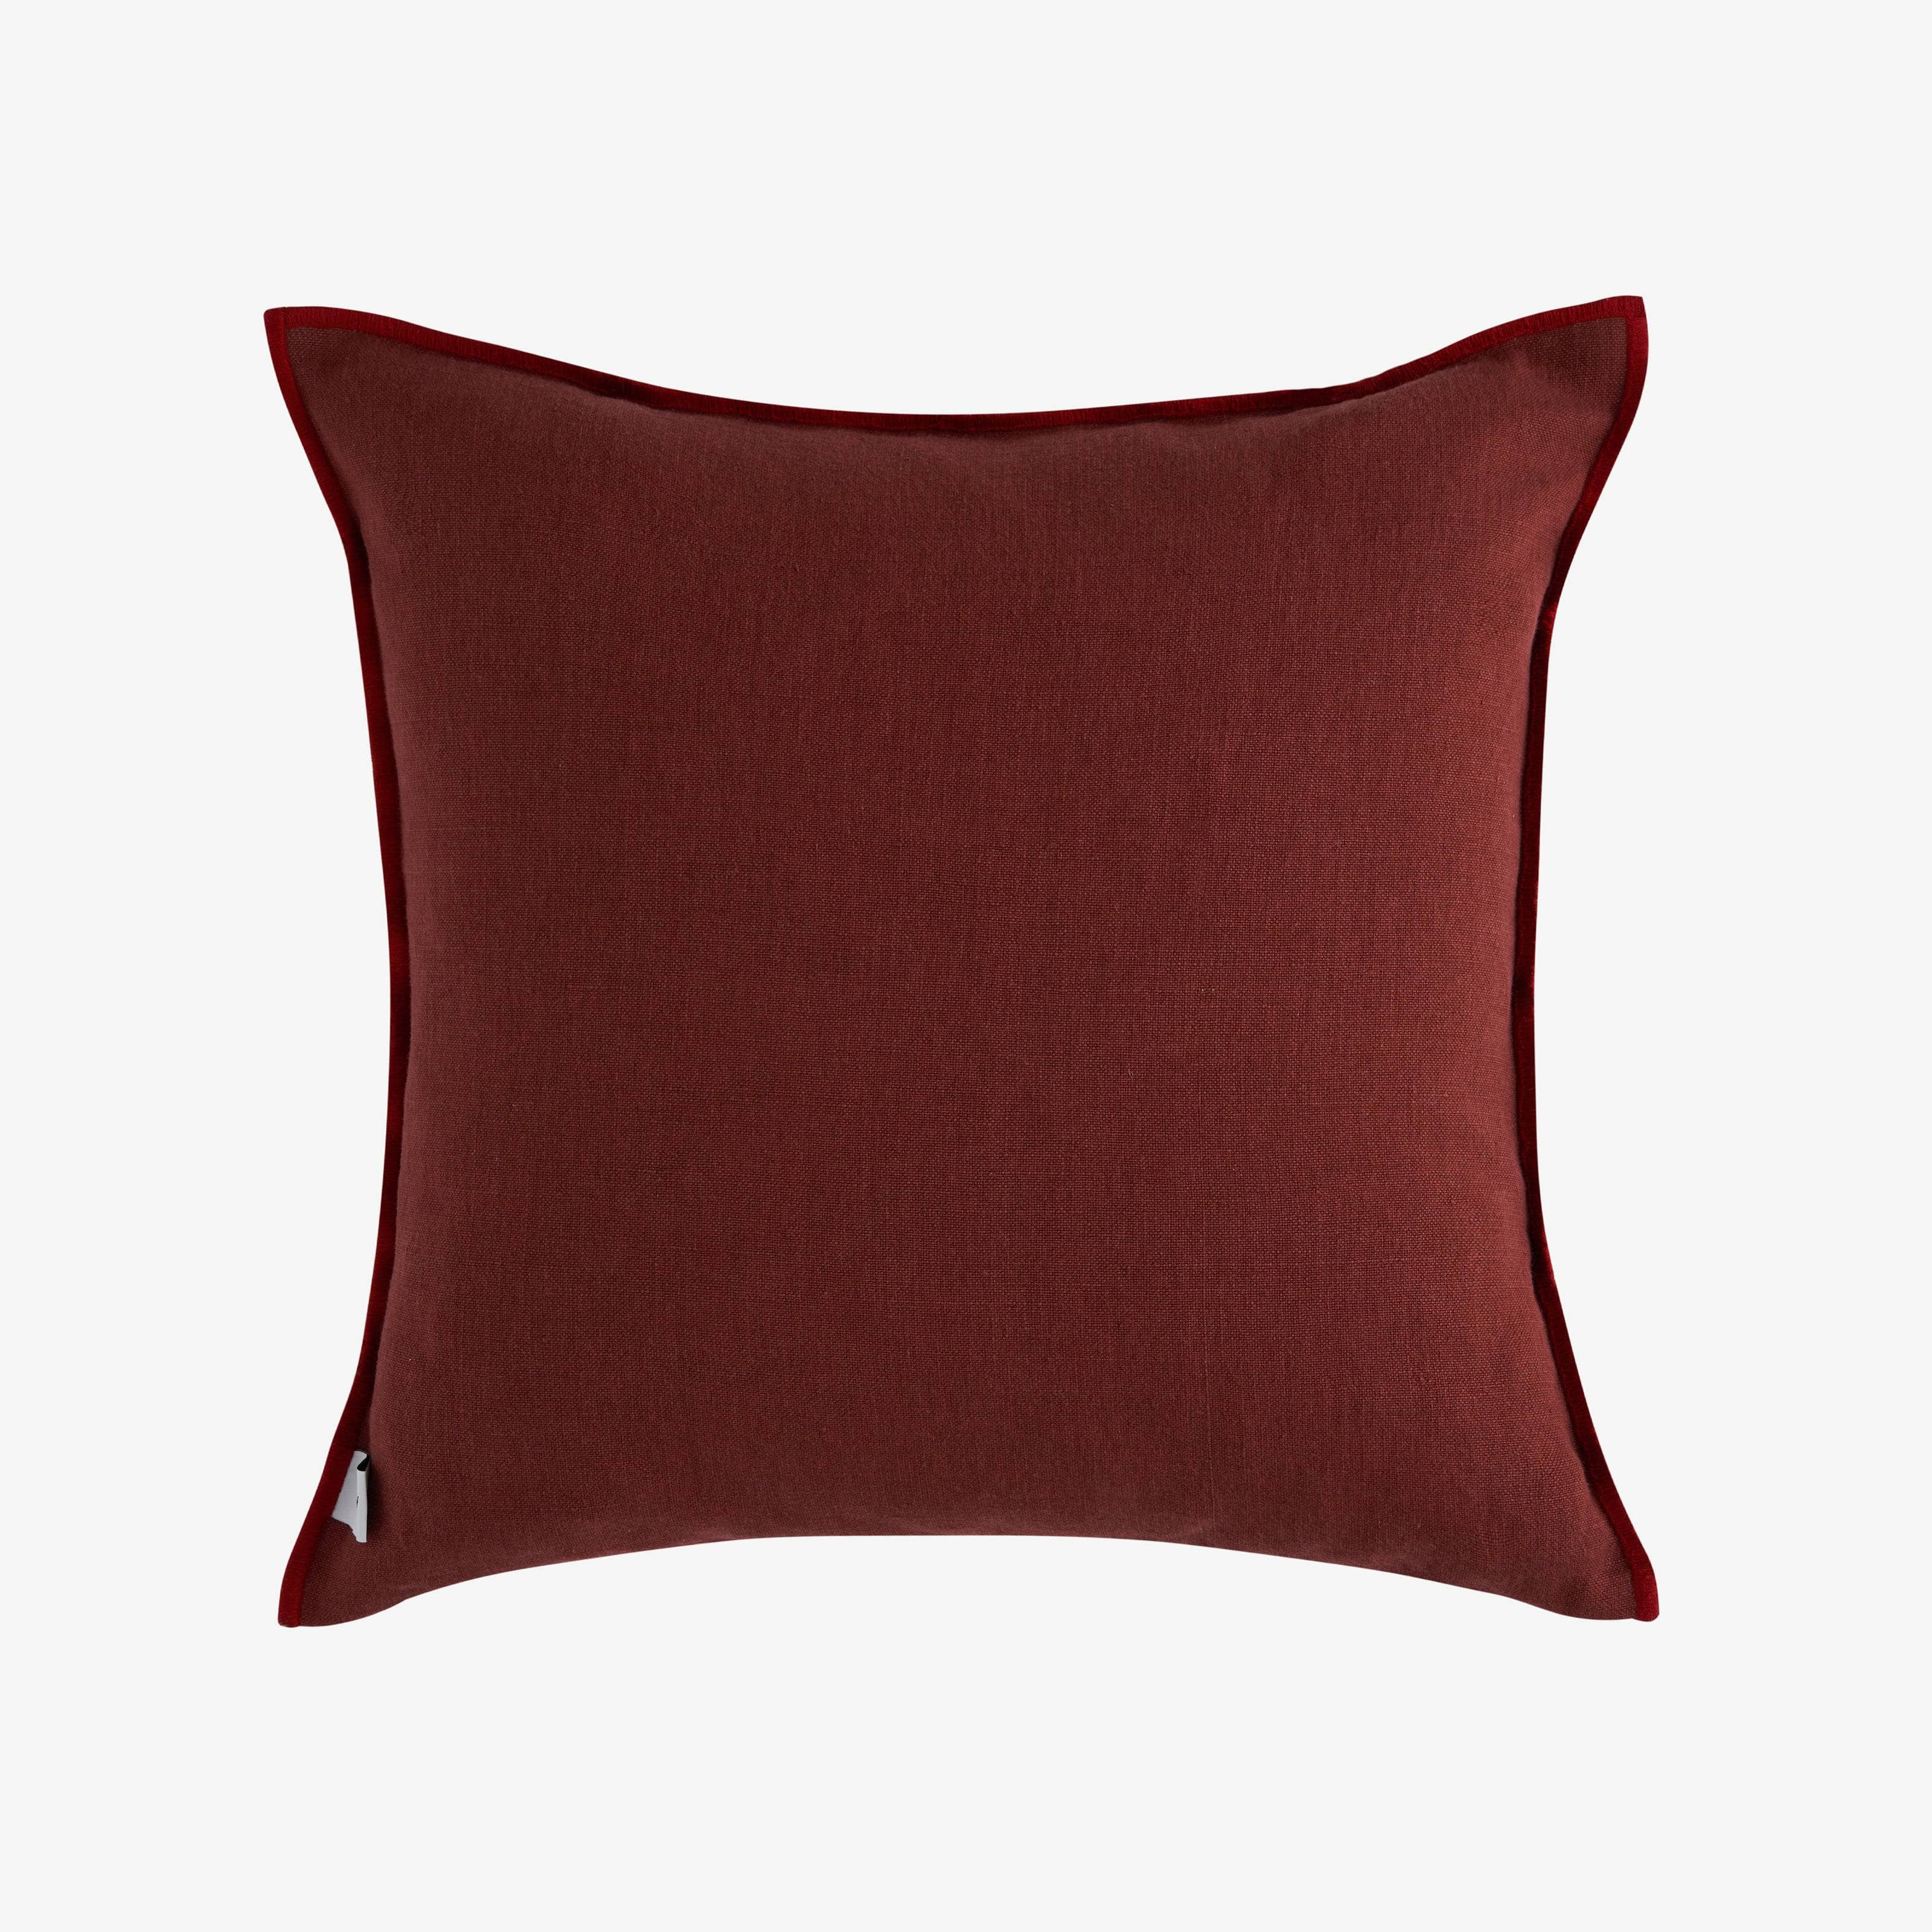 Lido Striped Linen Cushion Cover, Natural - Red, 45x45 cm - 2